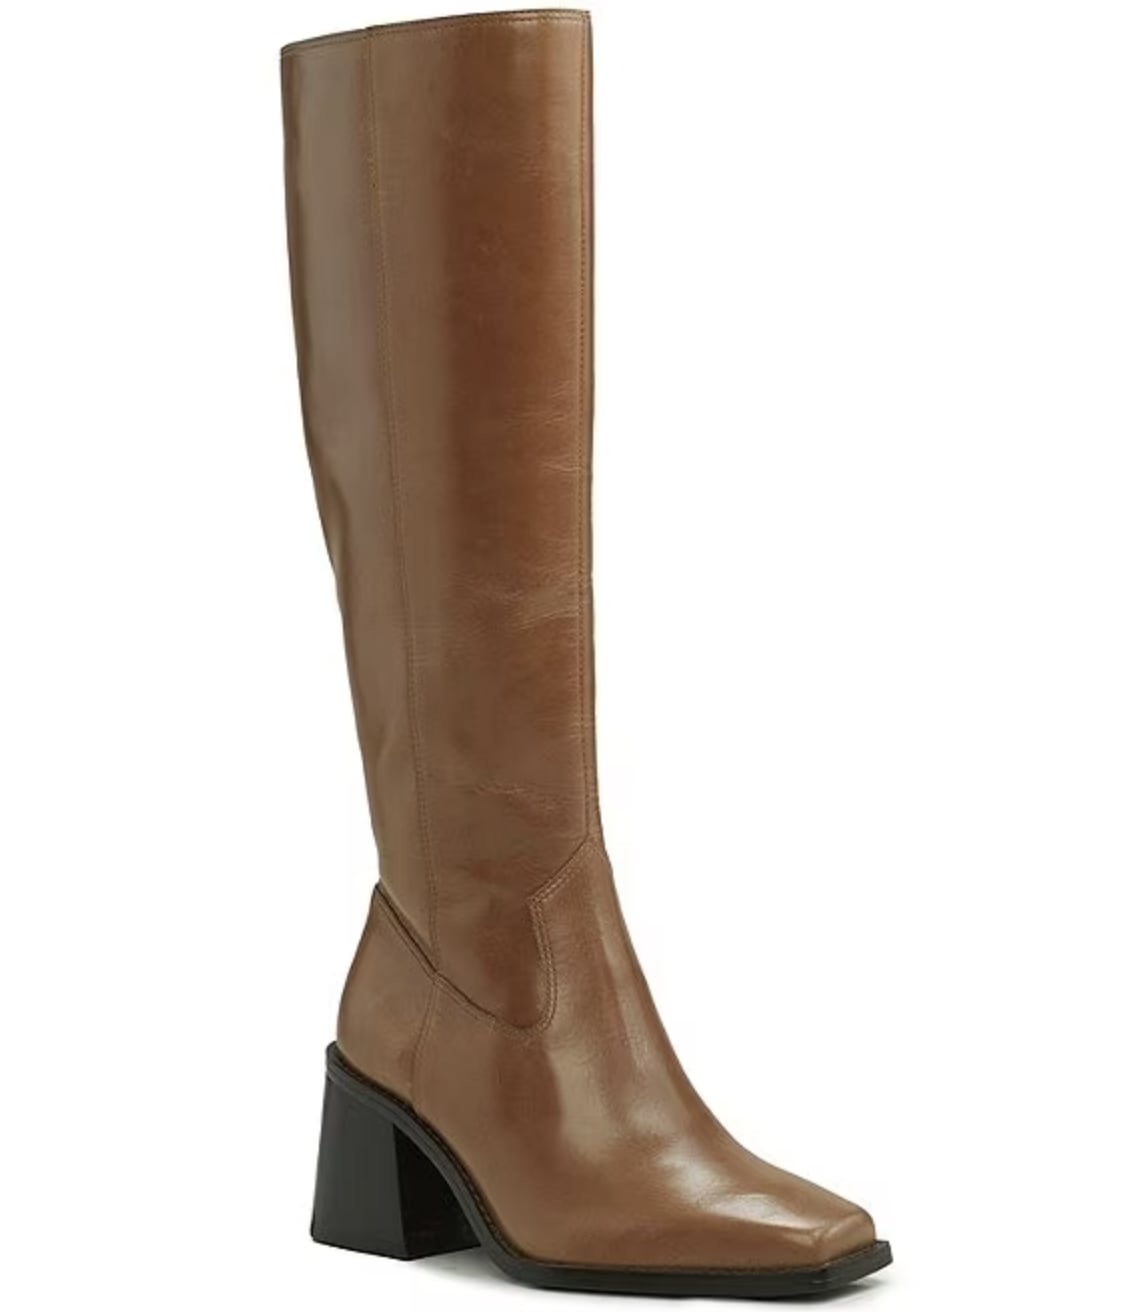 <p><a href="http://www.nordstrom.com/s/vince-camuto-sangeti-knee-high-boot-women-regular-wide-calf/7116315">BUY NOW</a></p><p>$138</p><p><a href="http://www.nordstrom.com/s/vince-camuto-sangeti-knee-high-boot-women-regular-wide-calf/7116315" class="ga-track"><strong>Vince Camuto Sangheti Knee High Boot</strong></a> ($138, originally $223)</p> <p>Invest in a pair of knee-high boots for fancy outings that are as comfortable as they are stylish. The flared block heel will make this pair easy to walk in, and the versatile color will pair well with most items in your closet.</p>